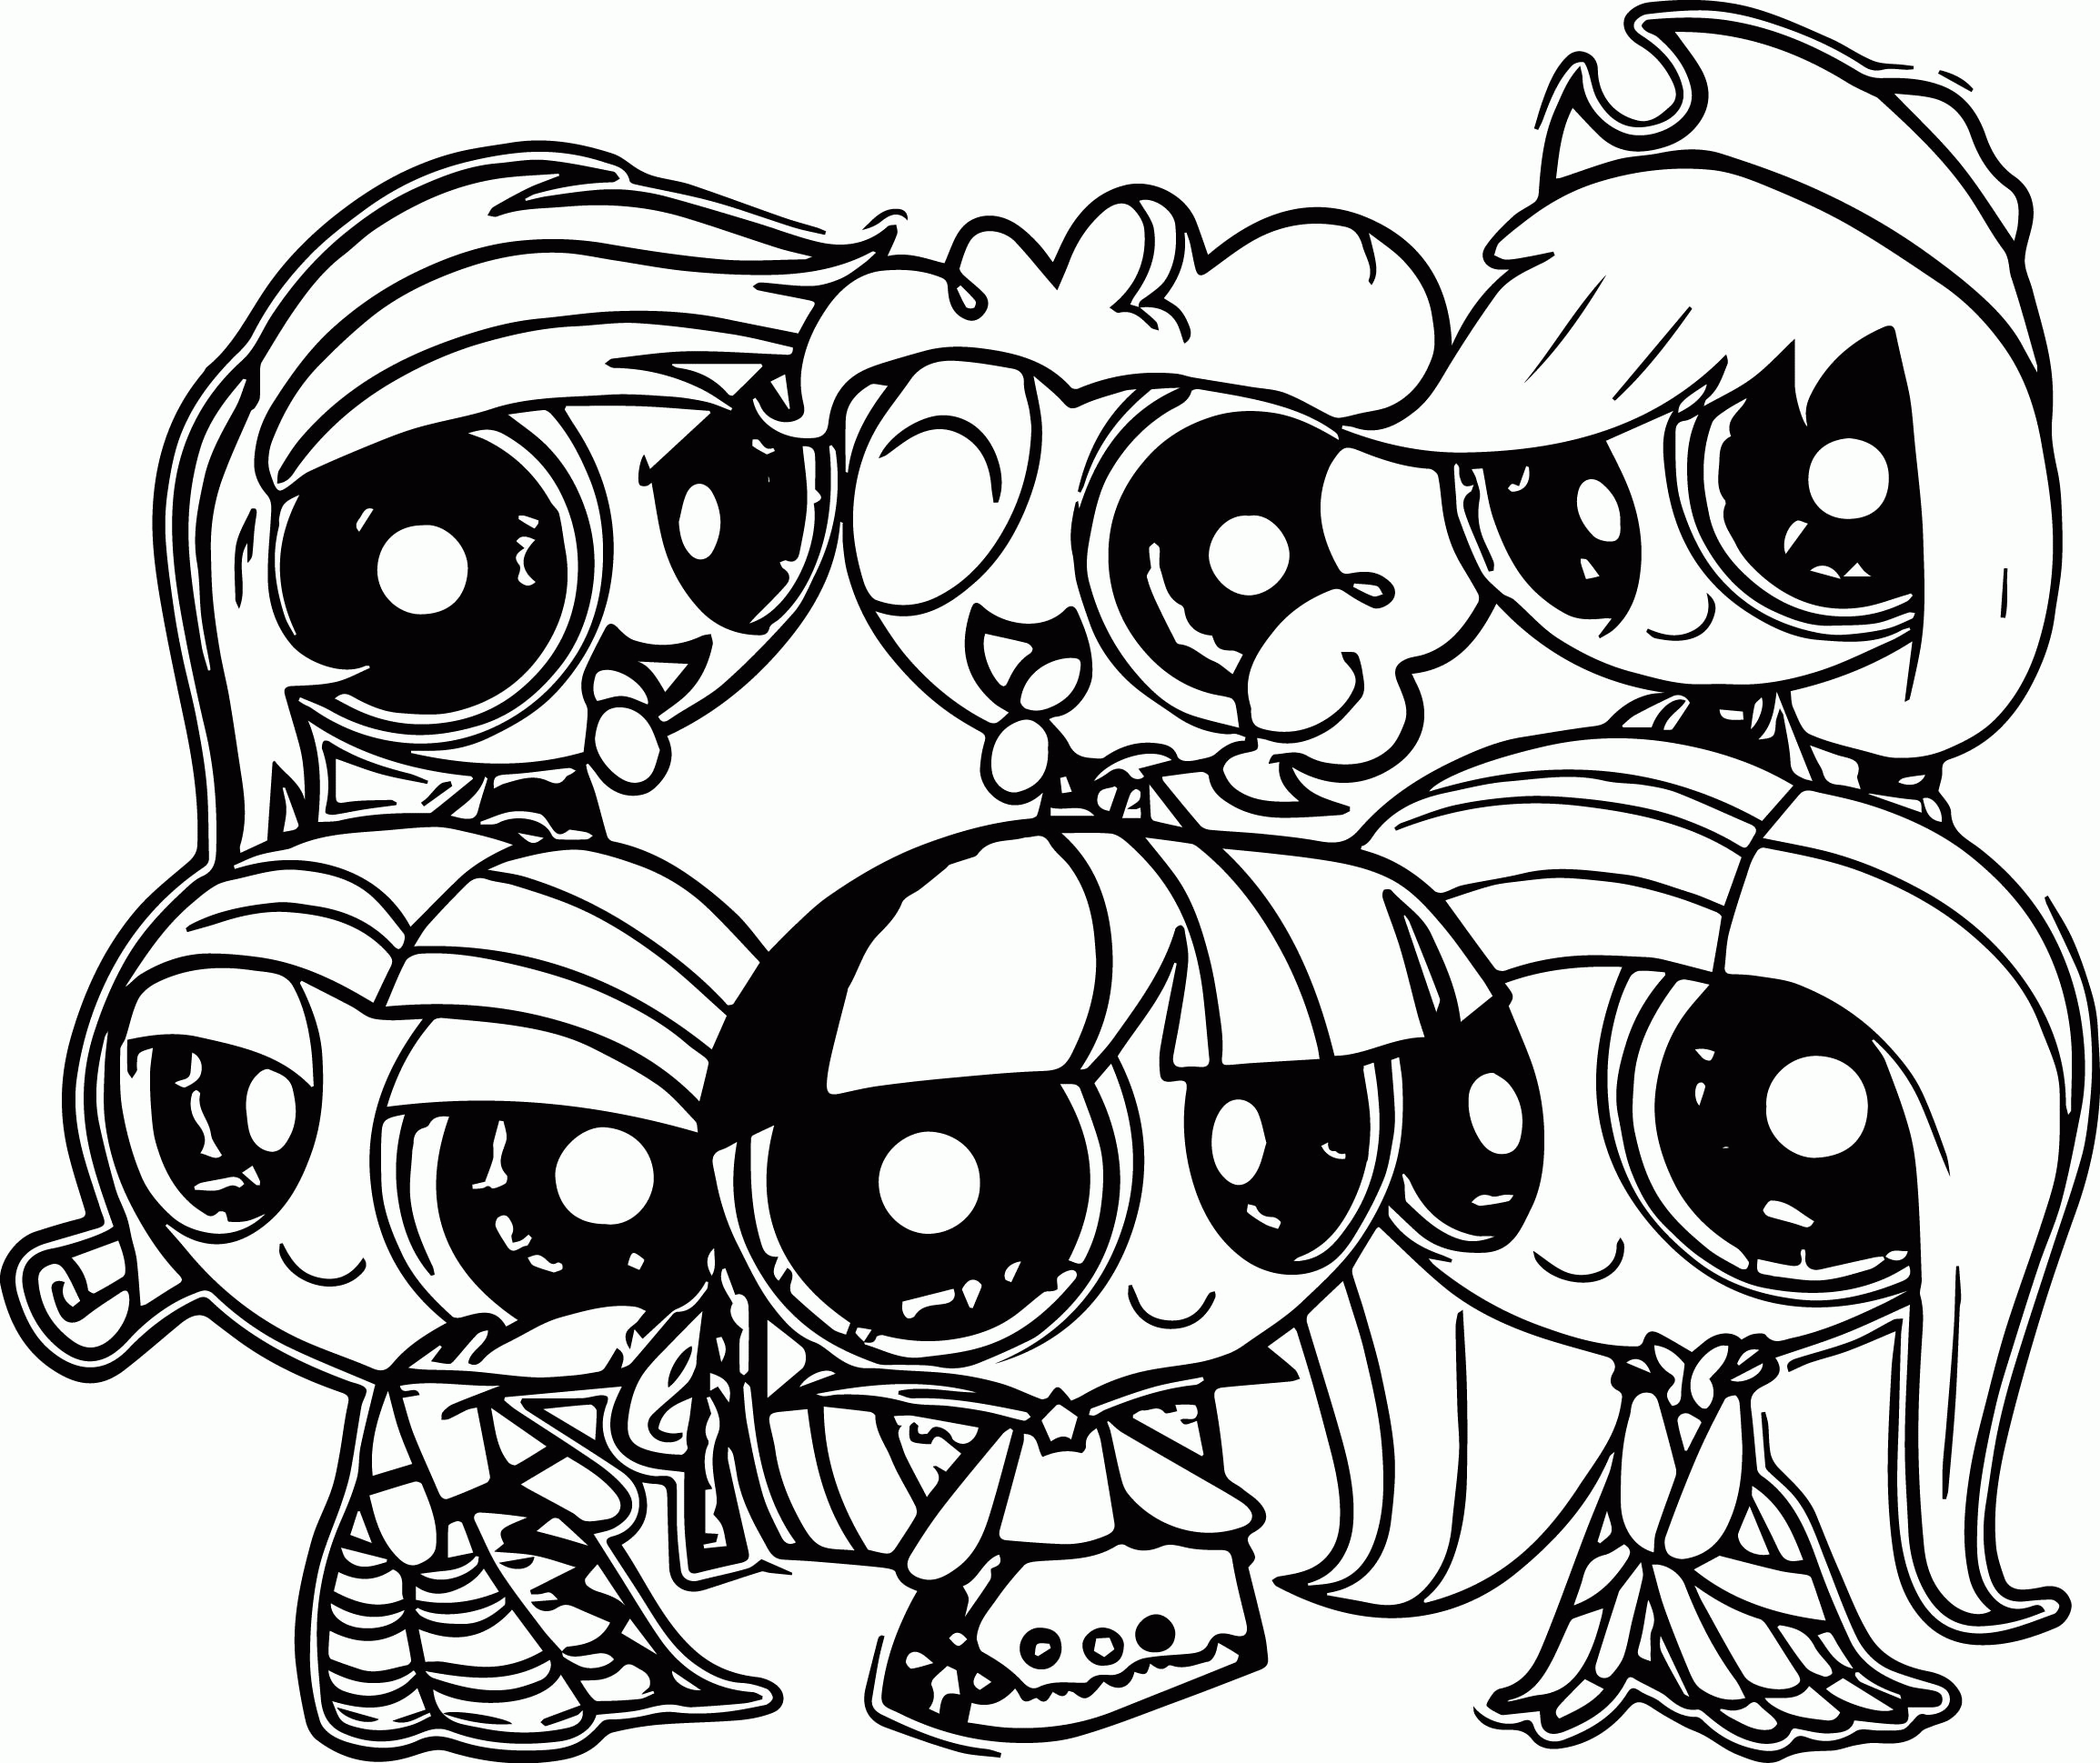 my-little-pony-coloring-pages-coloring